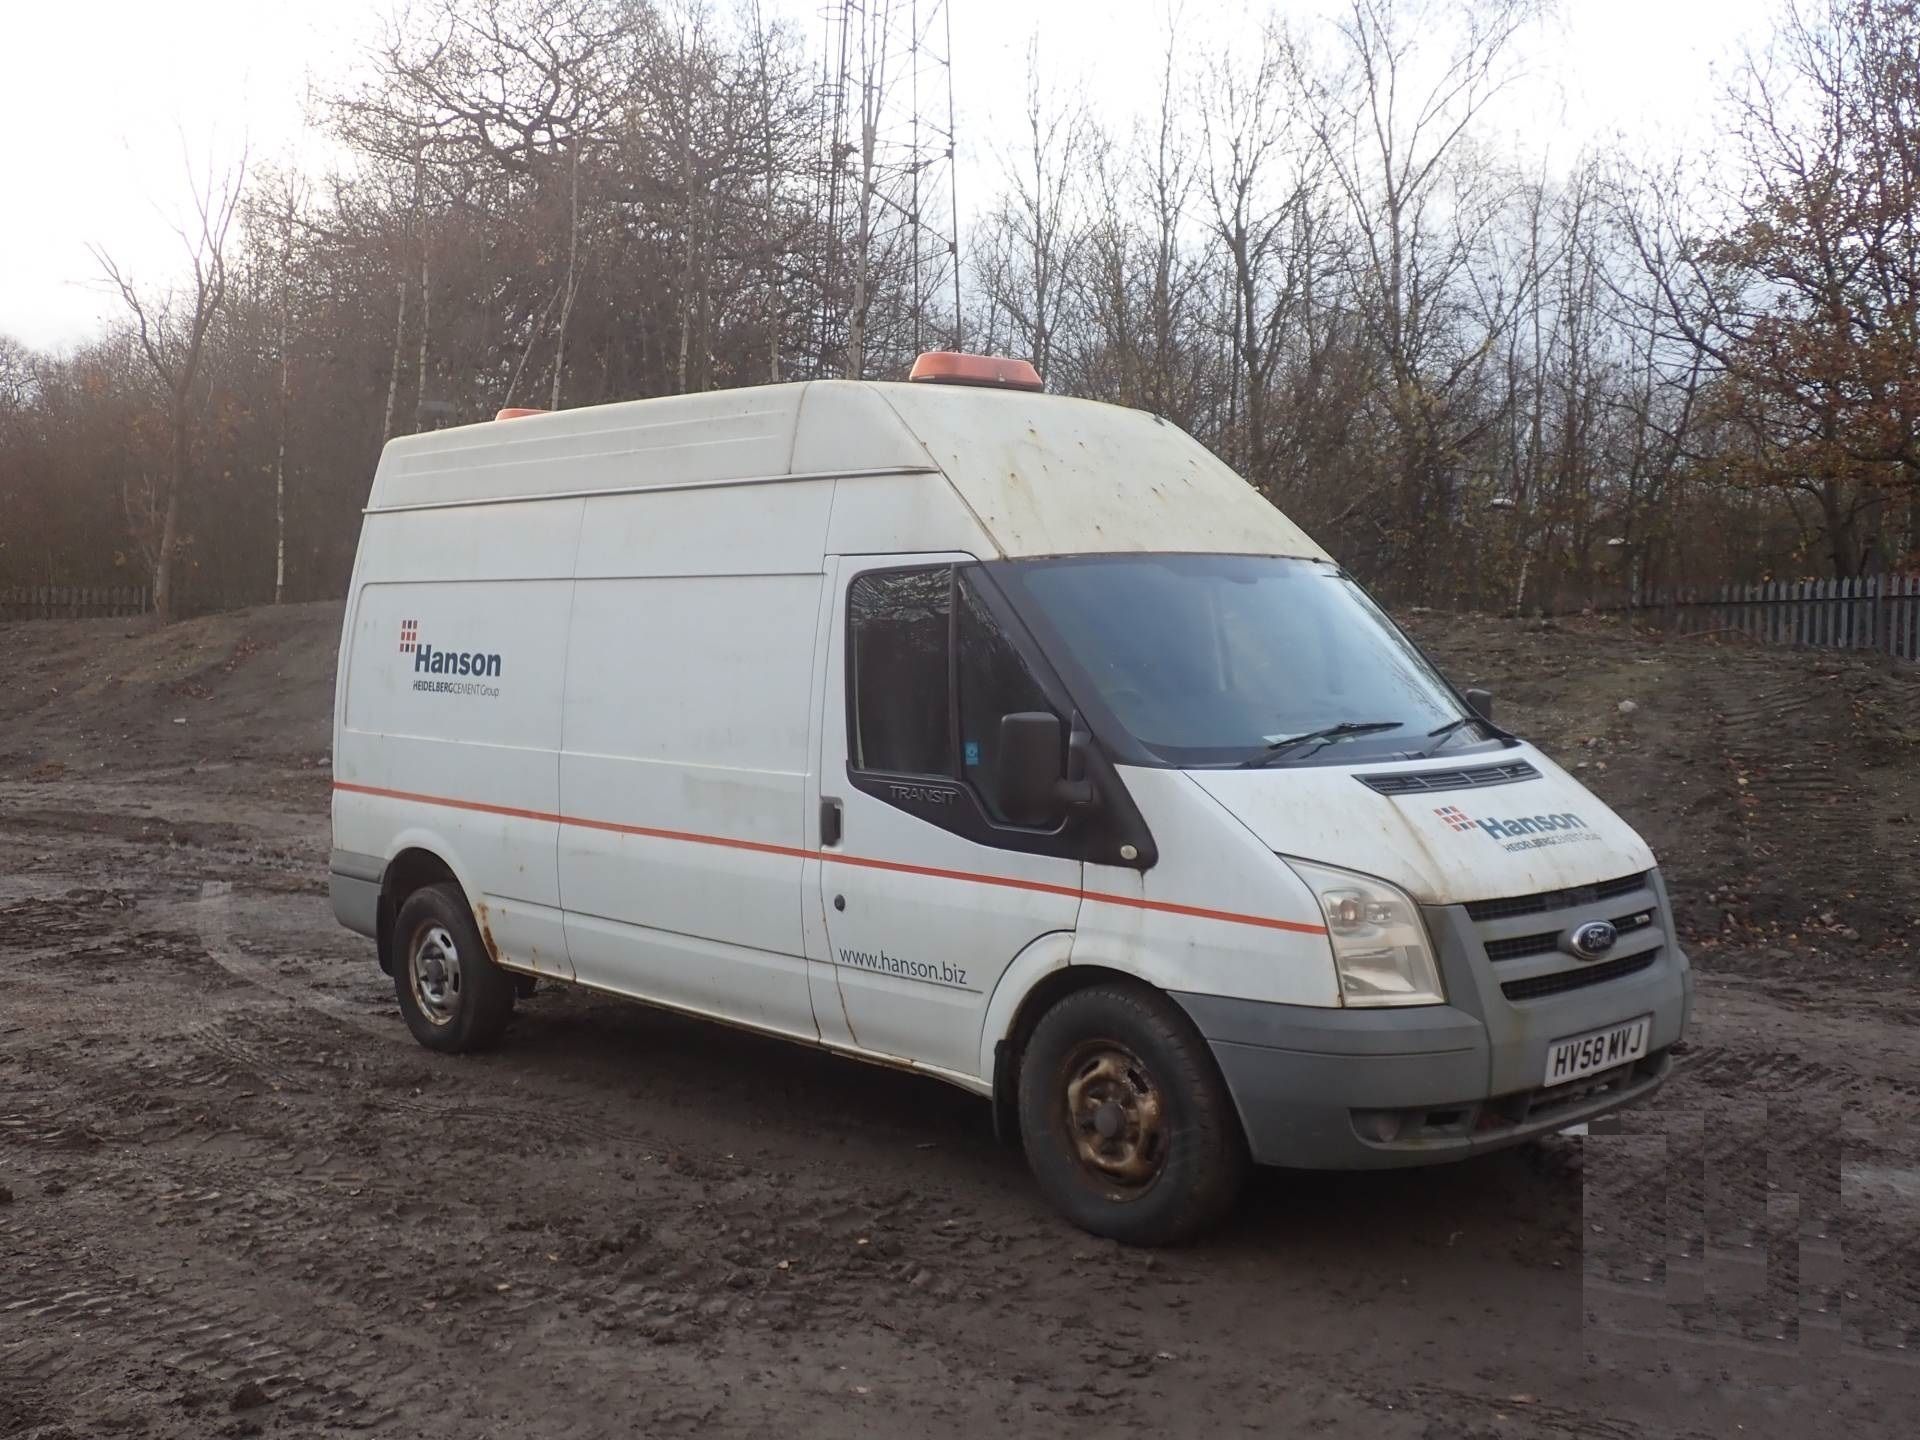 2008 Ford Transit 350 LWB 115 RWD 5 Door Panel Van - CL505 - Location: Corby, Northamptonshire - Image 4 of 12